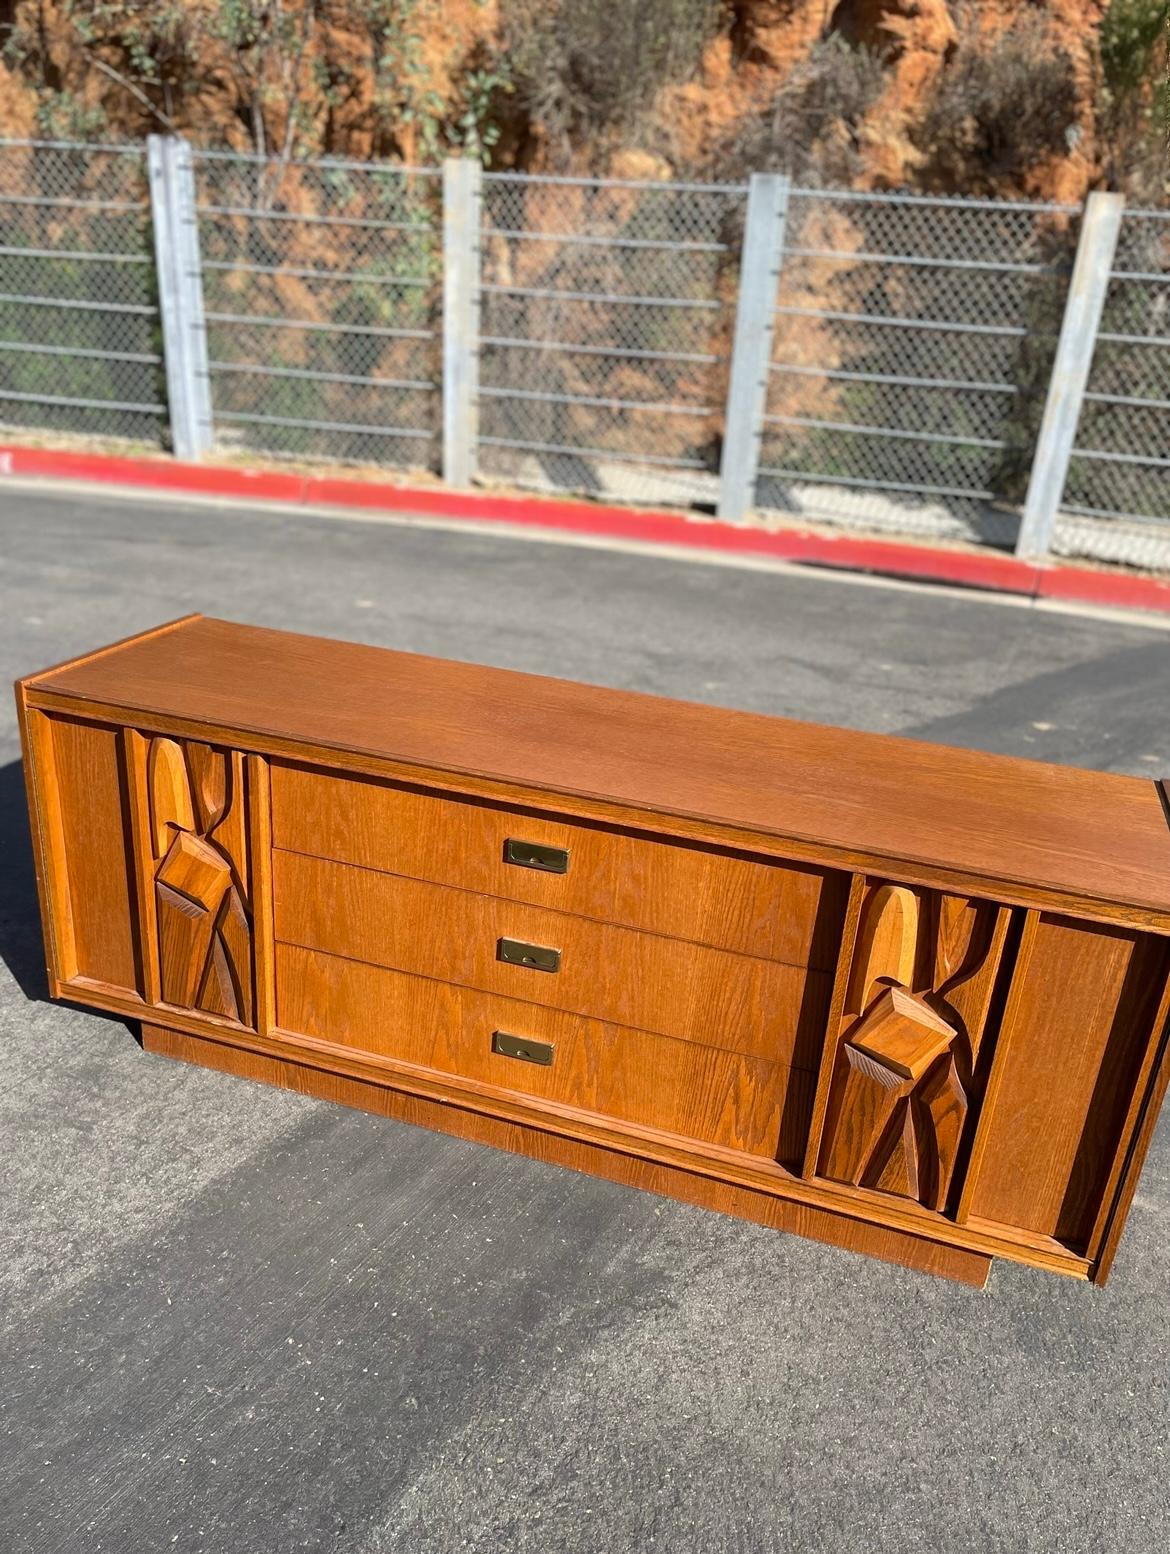 Talk about a a statement piece!

This is a beautiful mid century modern tiki brutalist credenza. This dresser has a  stunning  carved design on the cabinet doors. Such a versatile piece for your home, it could make a great tv stand, bedroom dresser,